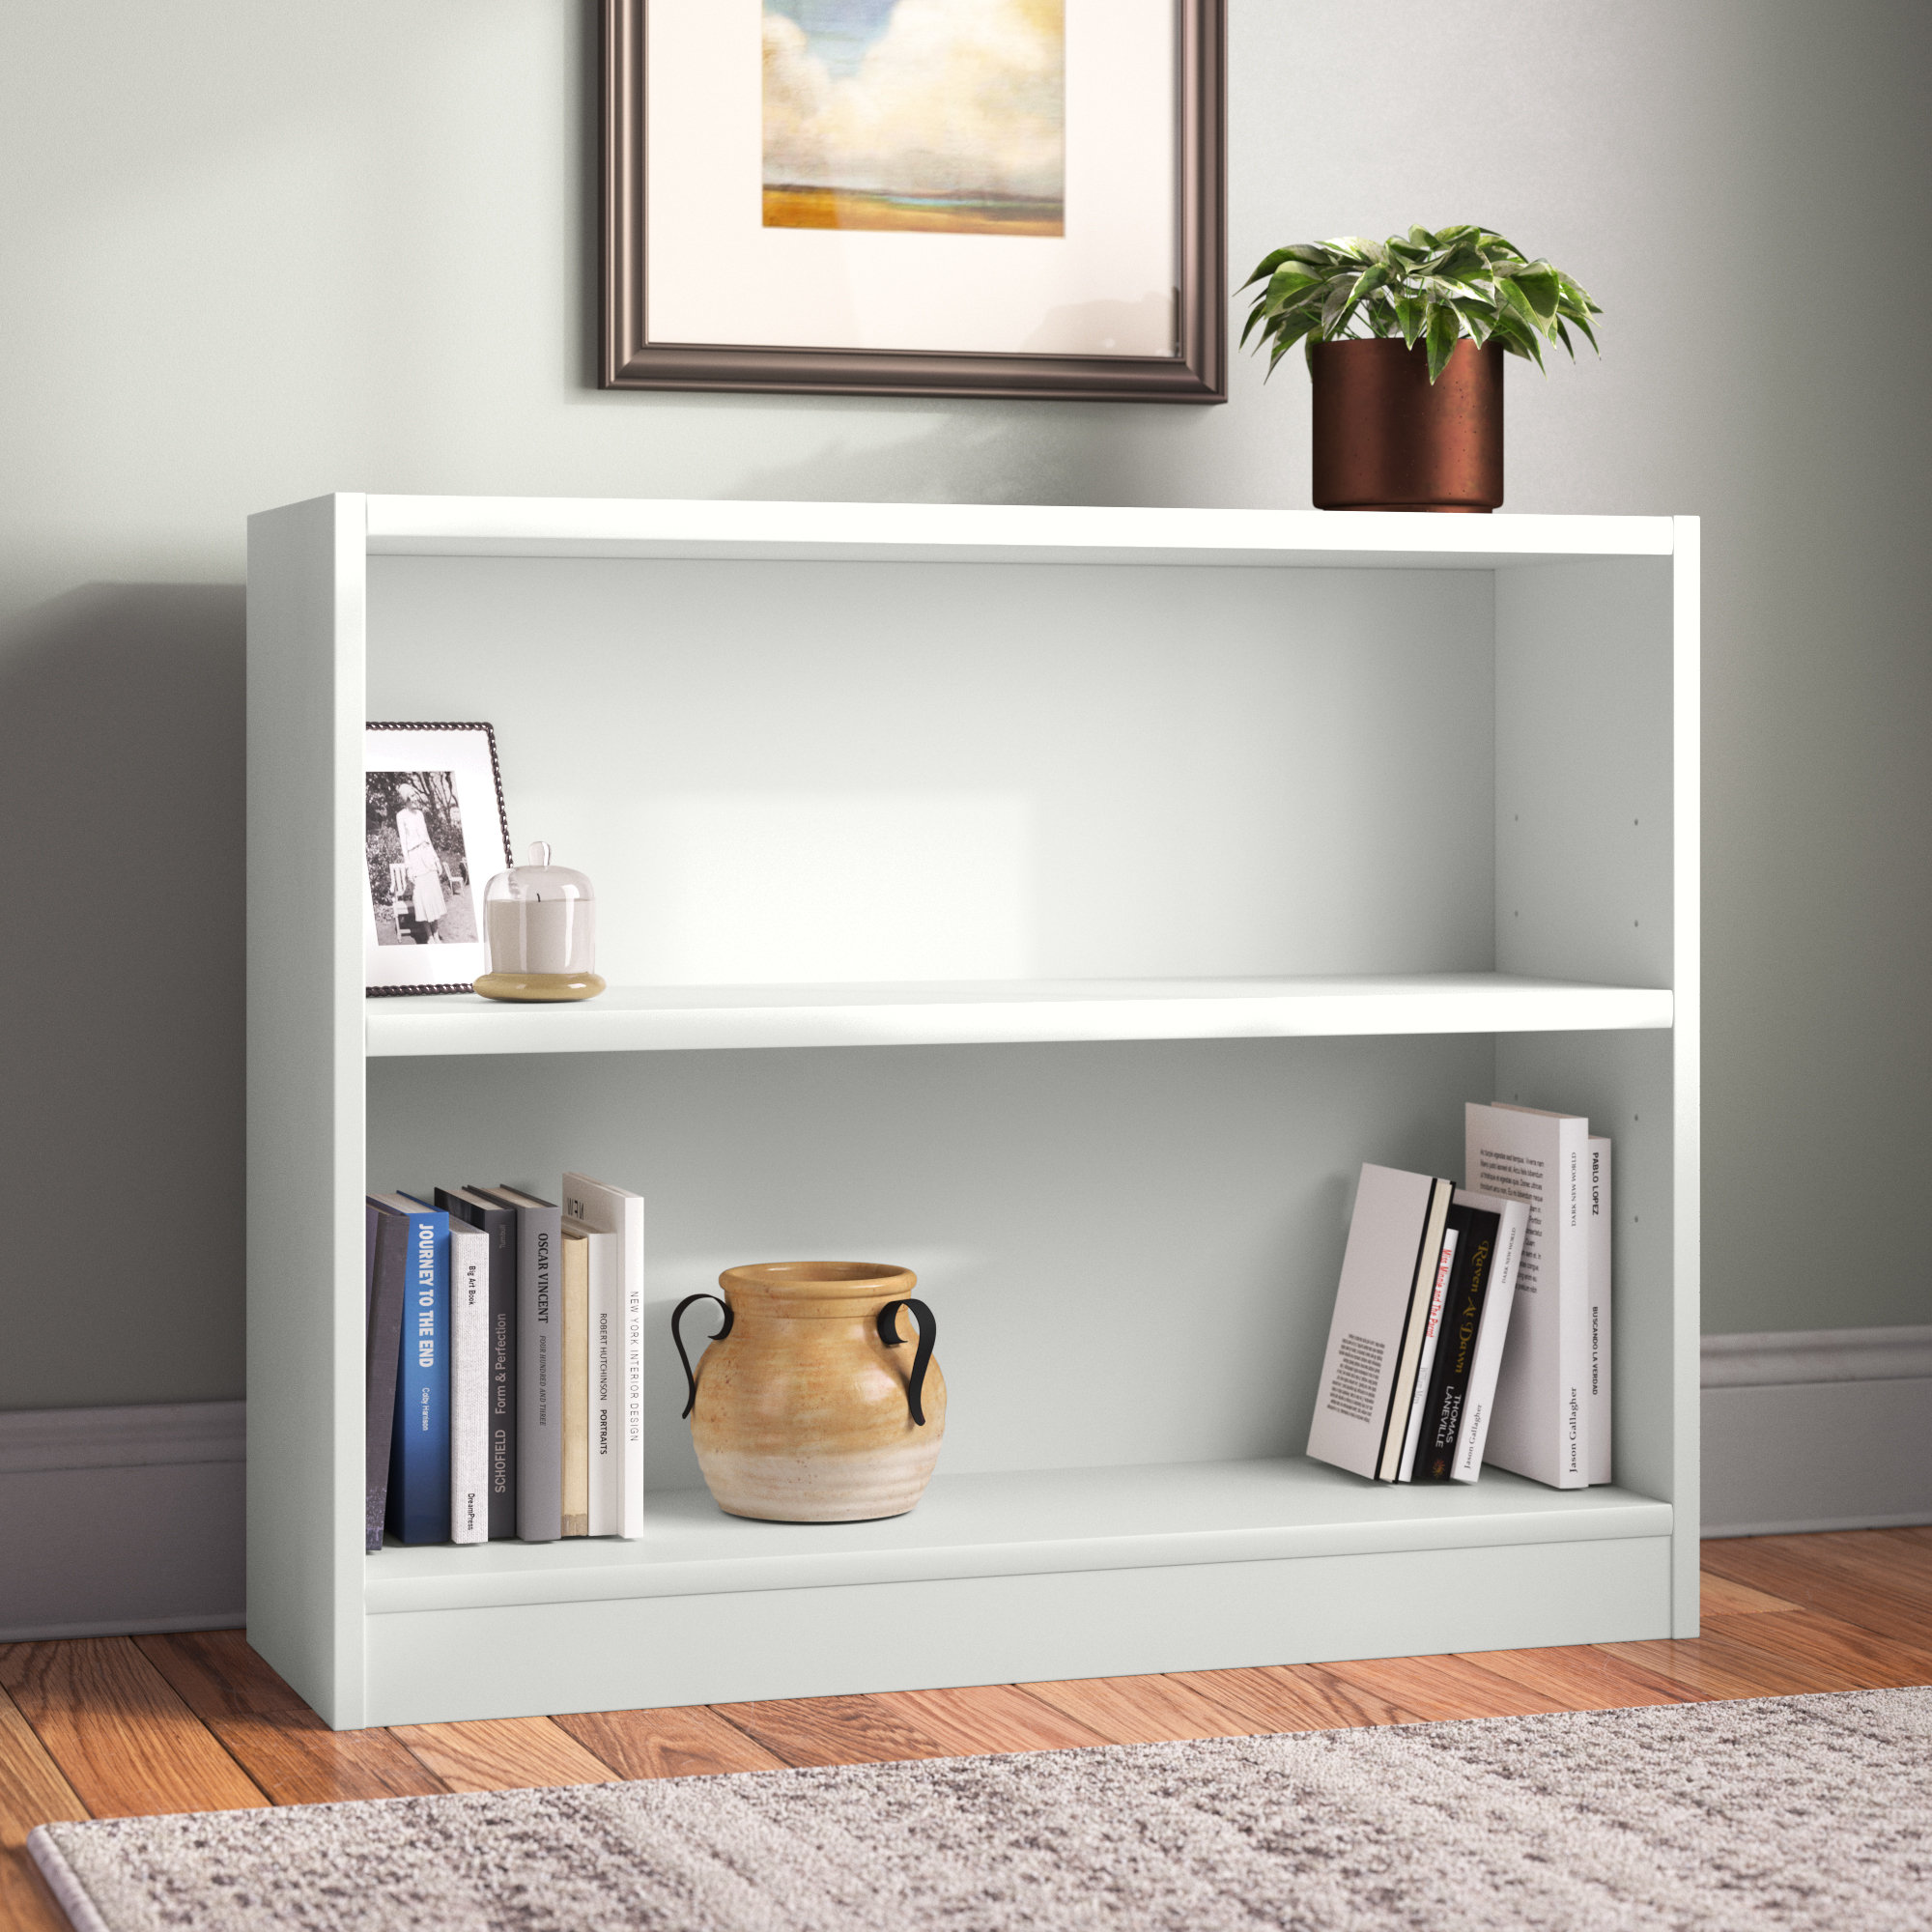 Wooden Shelves, Shelving Units, Bookcases & Storage Solutions